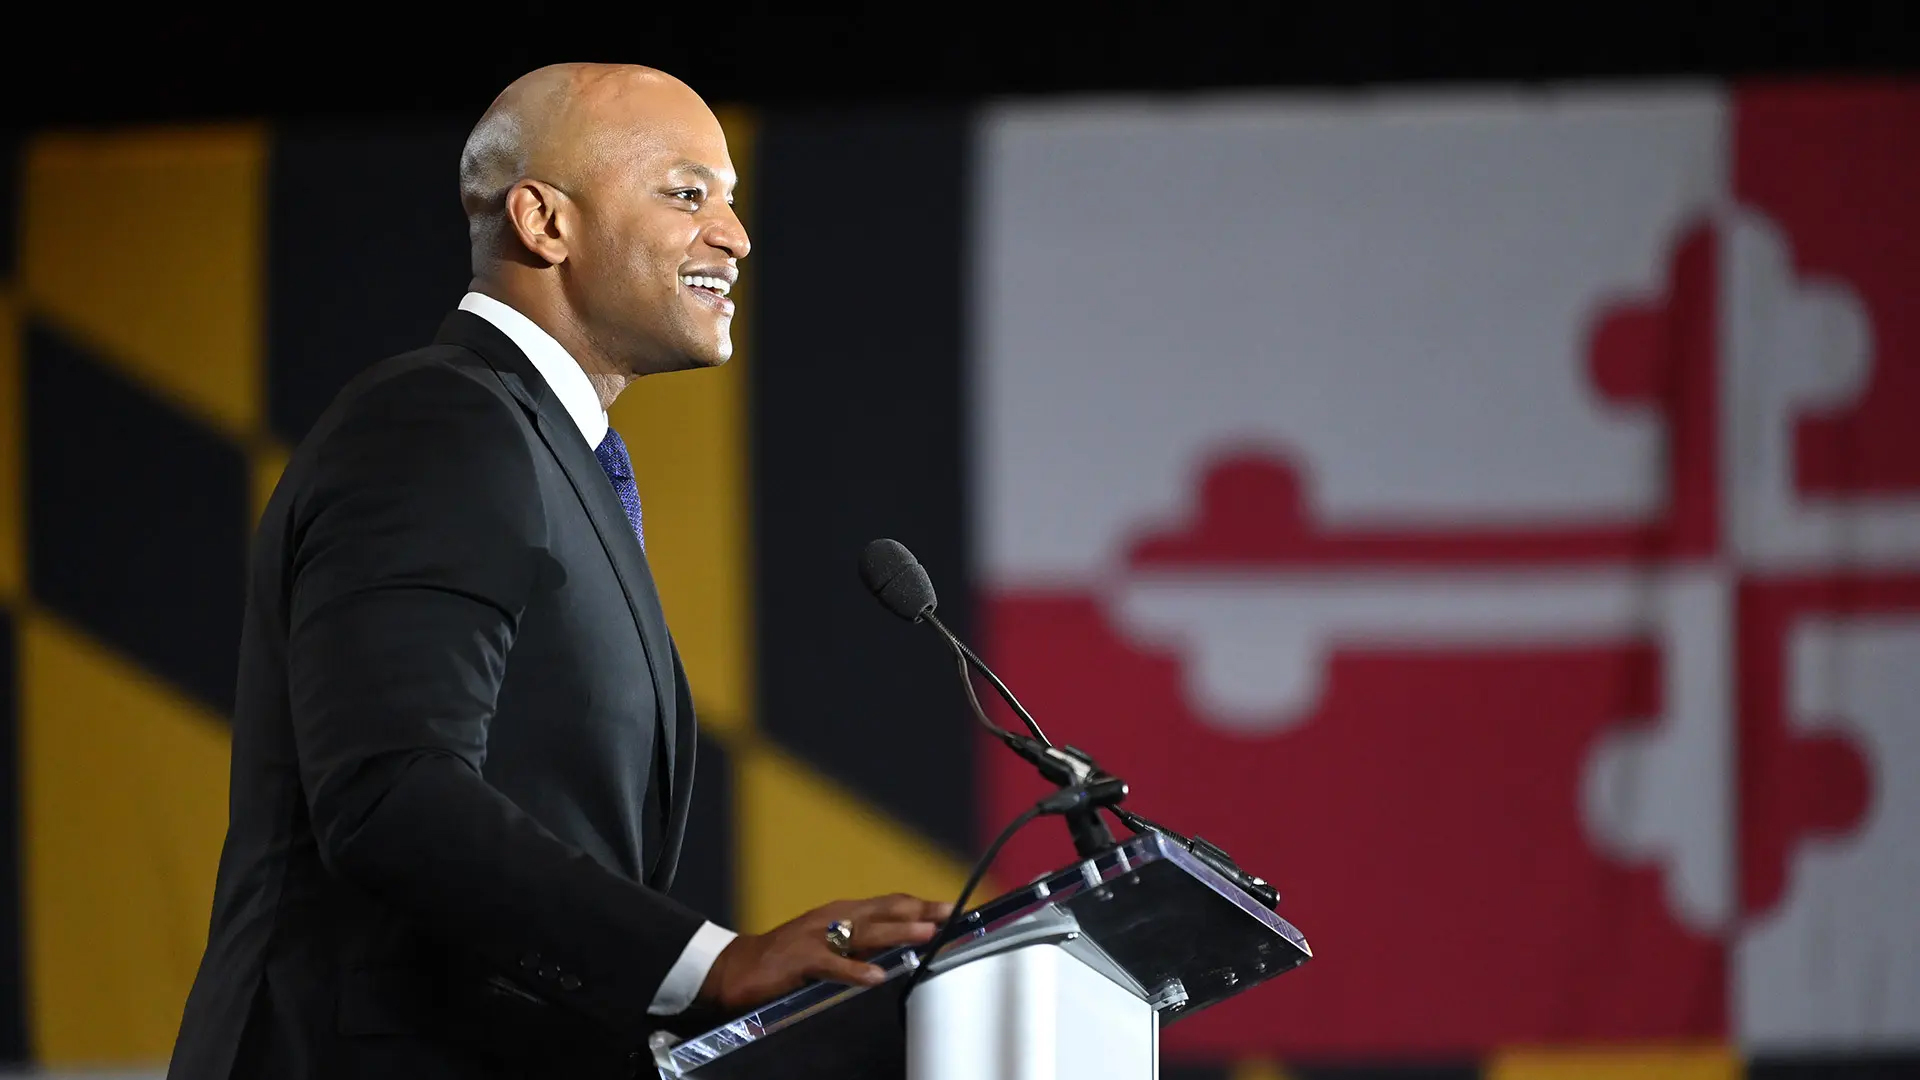 Gov. Wes Moore is an Army combat veteran, founded a company to support underserved students in college, and has written several books, including the bestseller “The Other Wes Moore." Photo courtesy of the Office of Gov. Wes Moore.